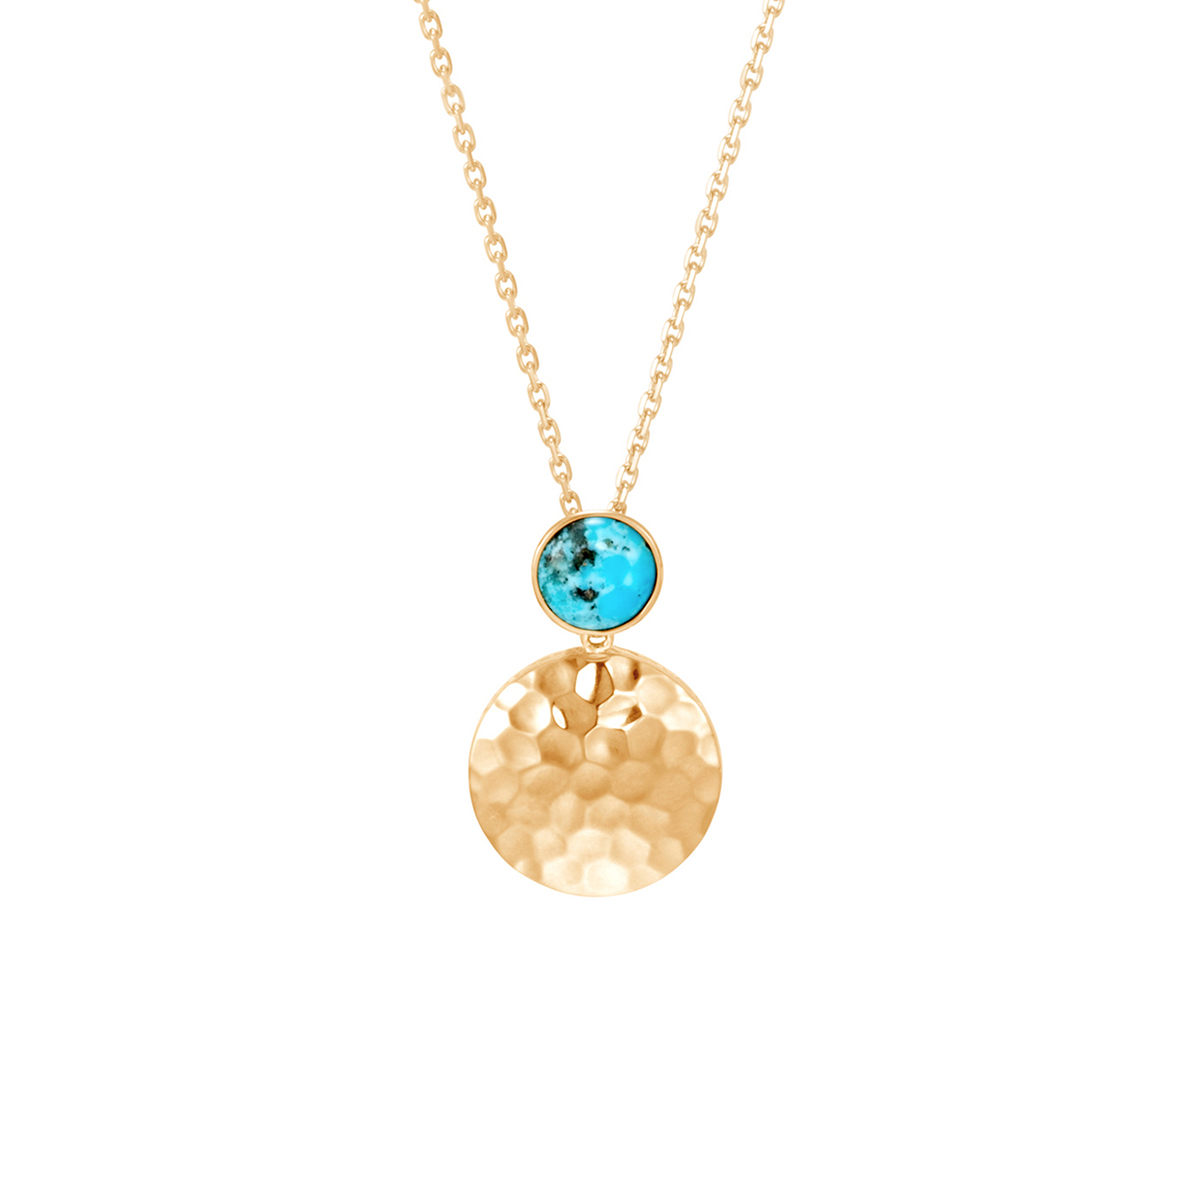 John Hardy 18K Yellow Gold Turquoise Pendant with Chain